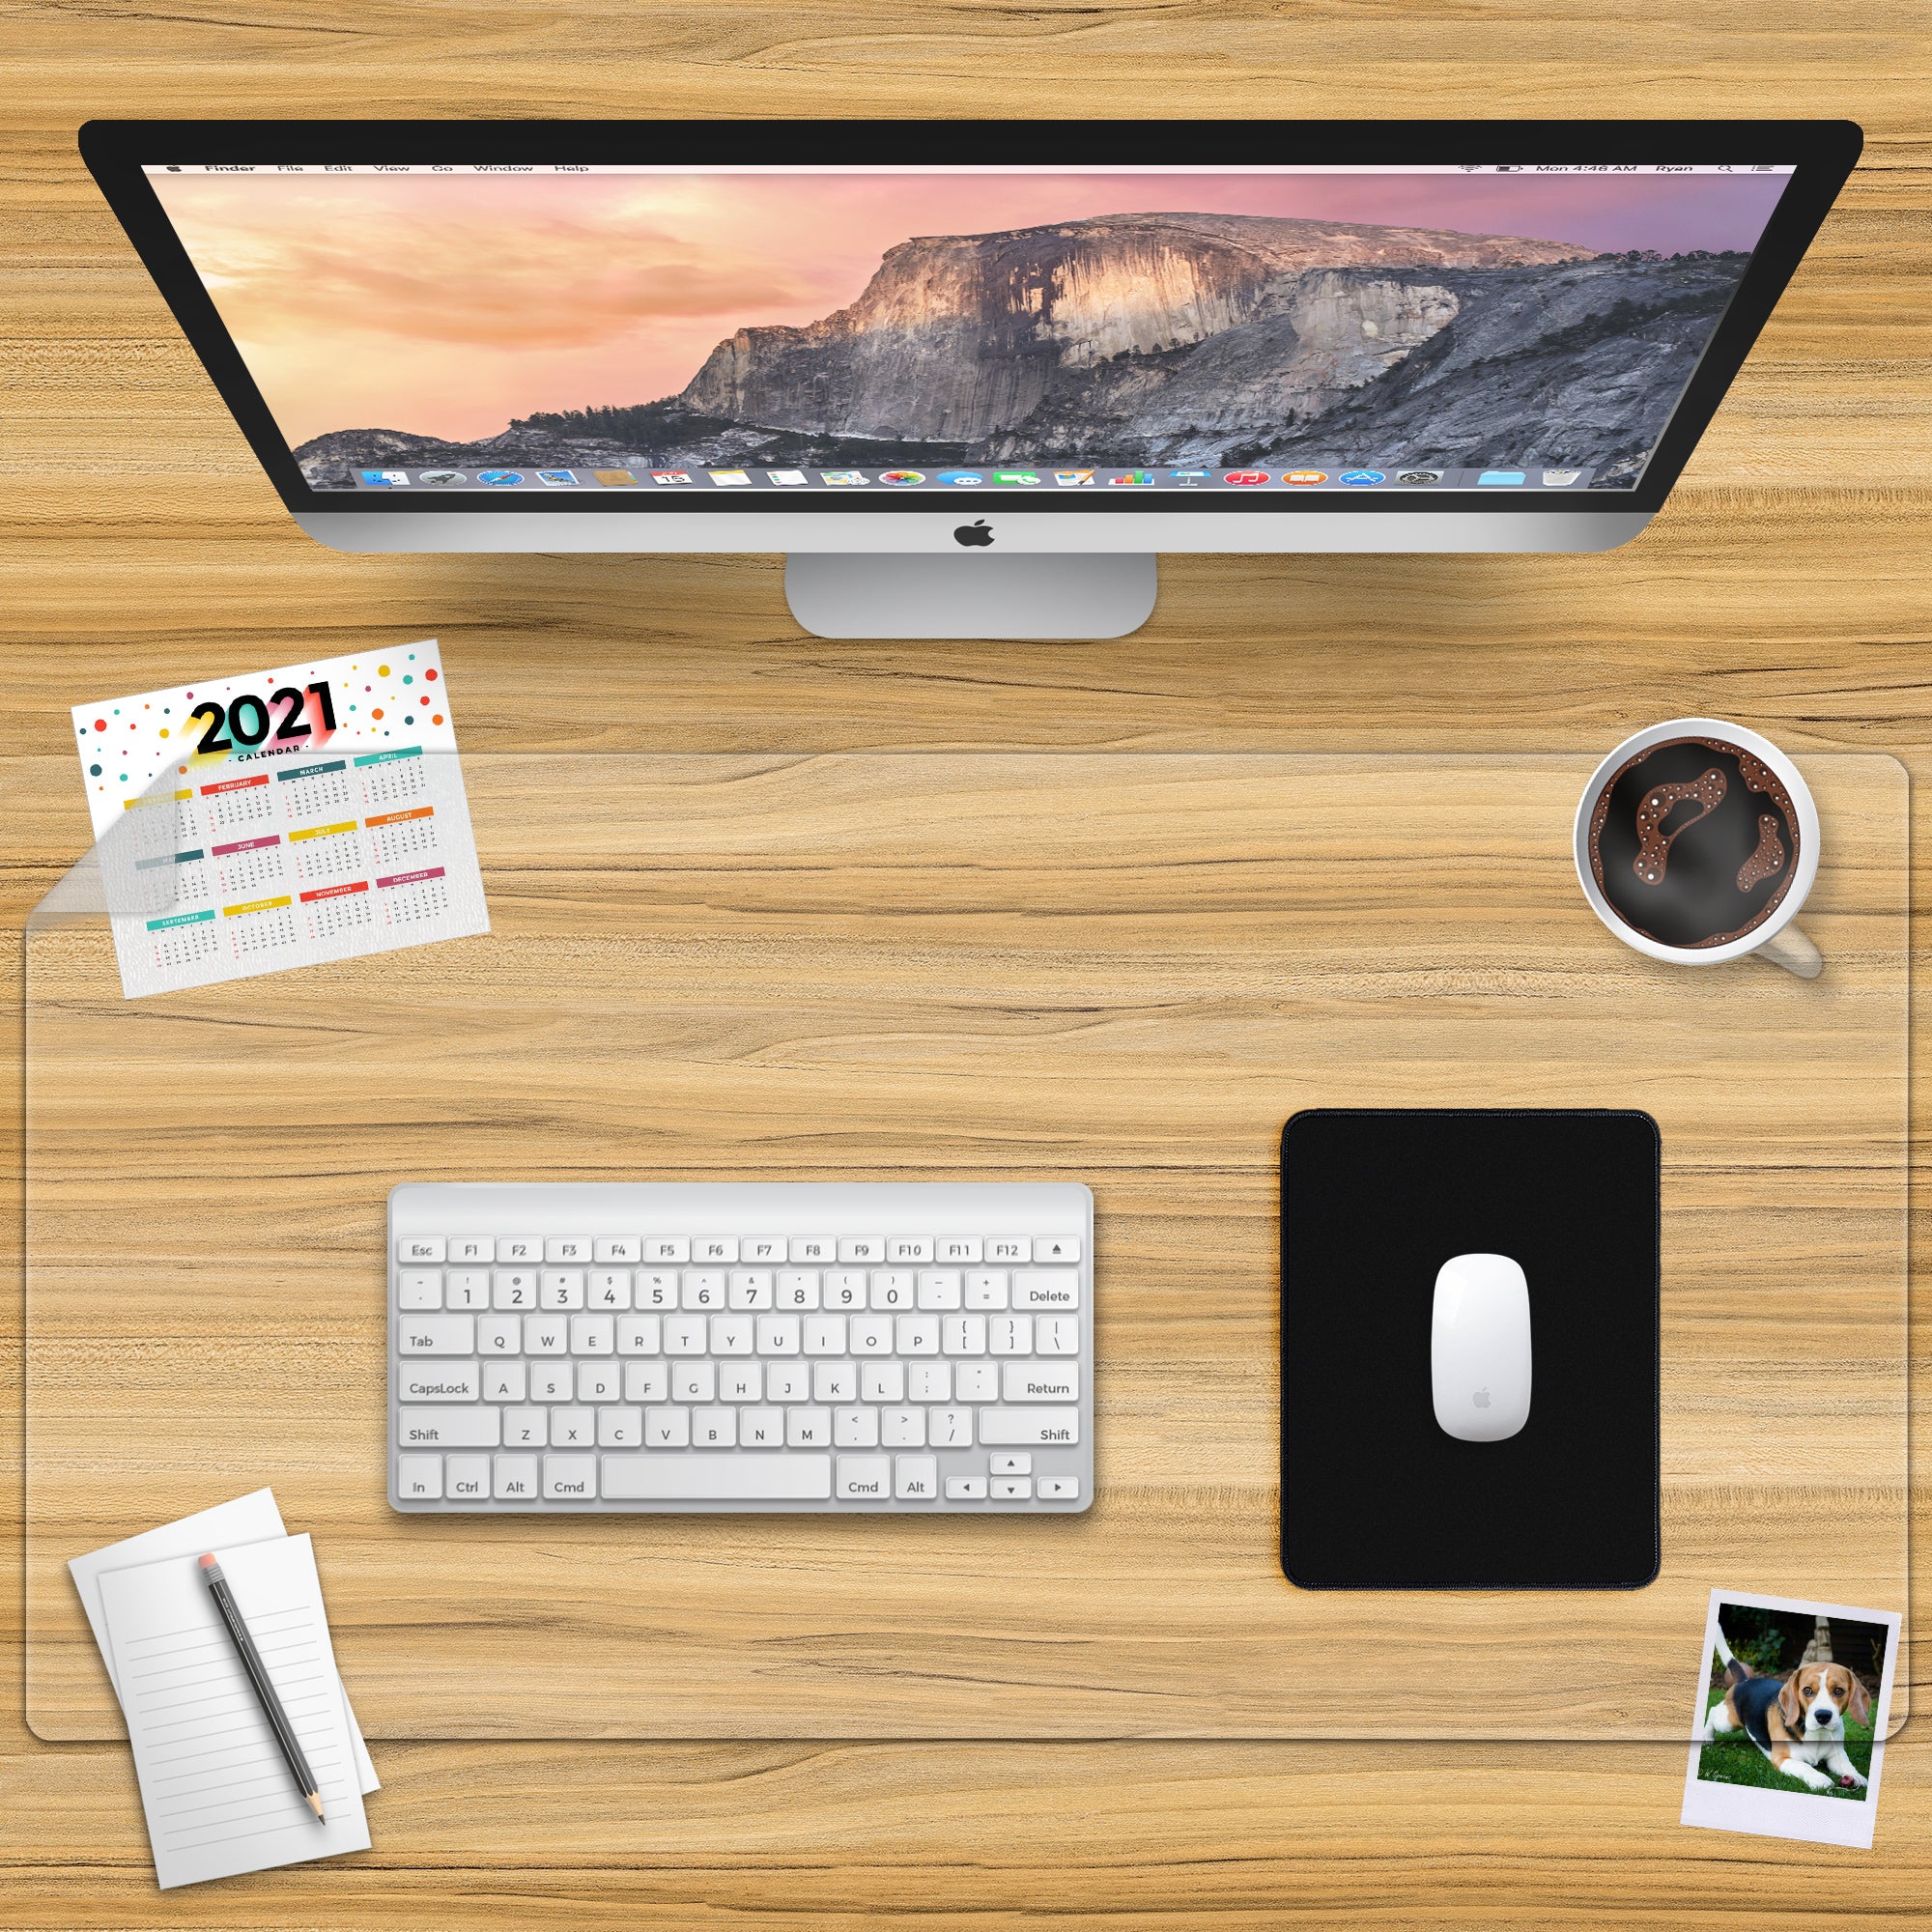 Awnour Clear Desk Pad - Workplace protector - Non-Slip - Comes with free Mouse Pad